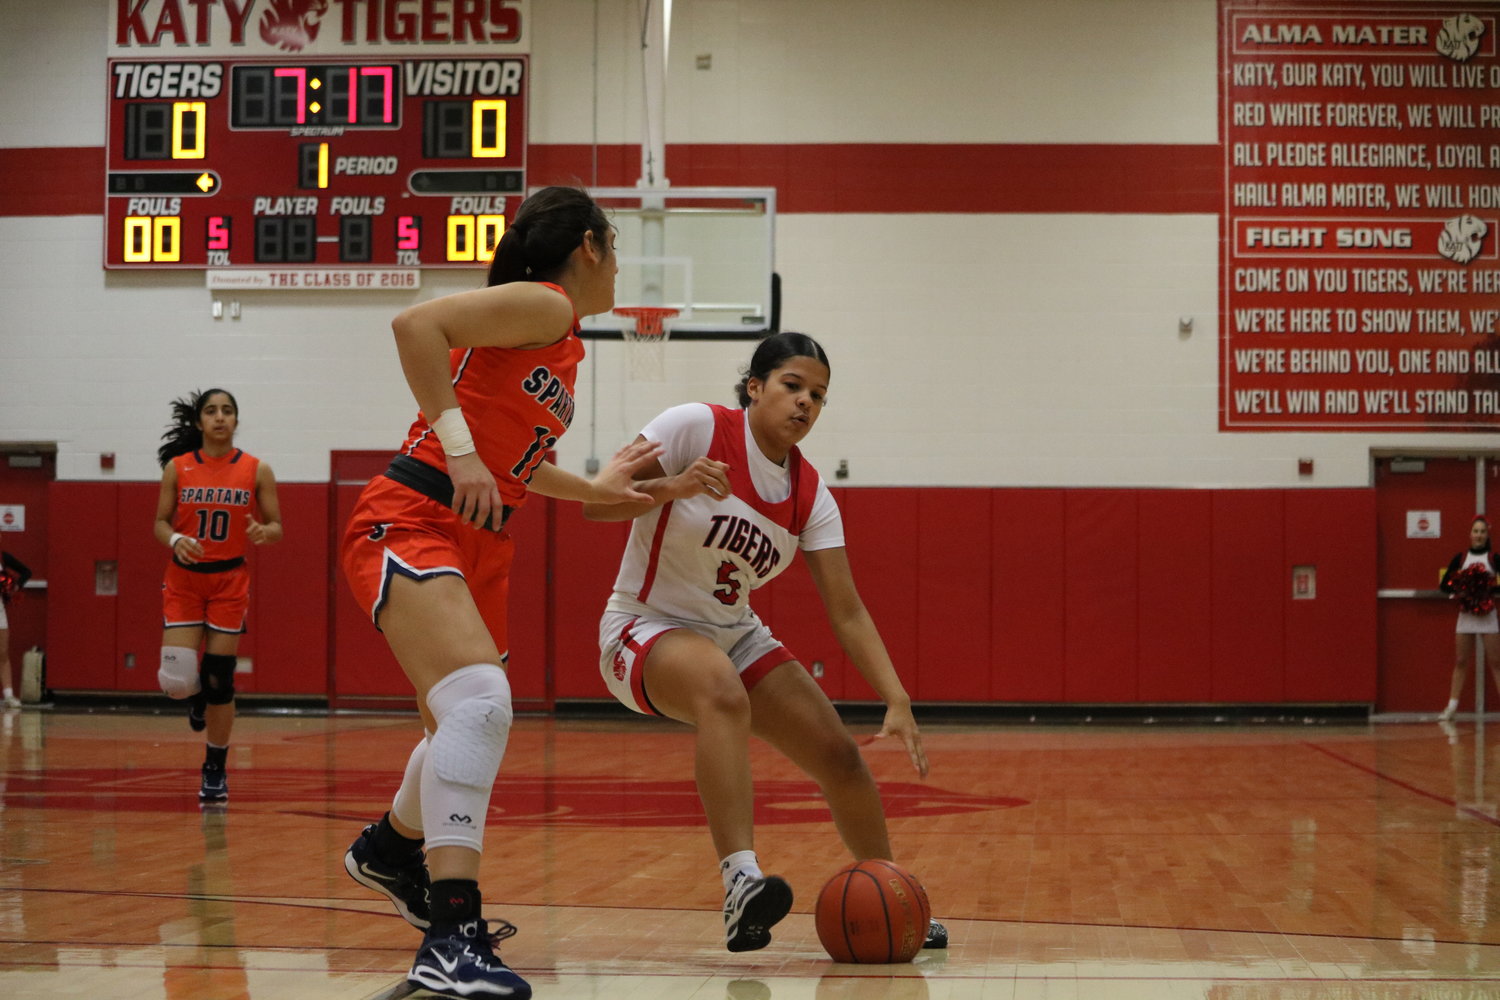 Ashlynn Alexander tries to spin past a defender during Friday's game between Seven Lakes and Katy at the Katy gym.